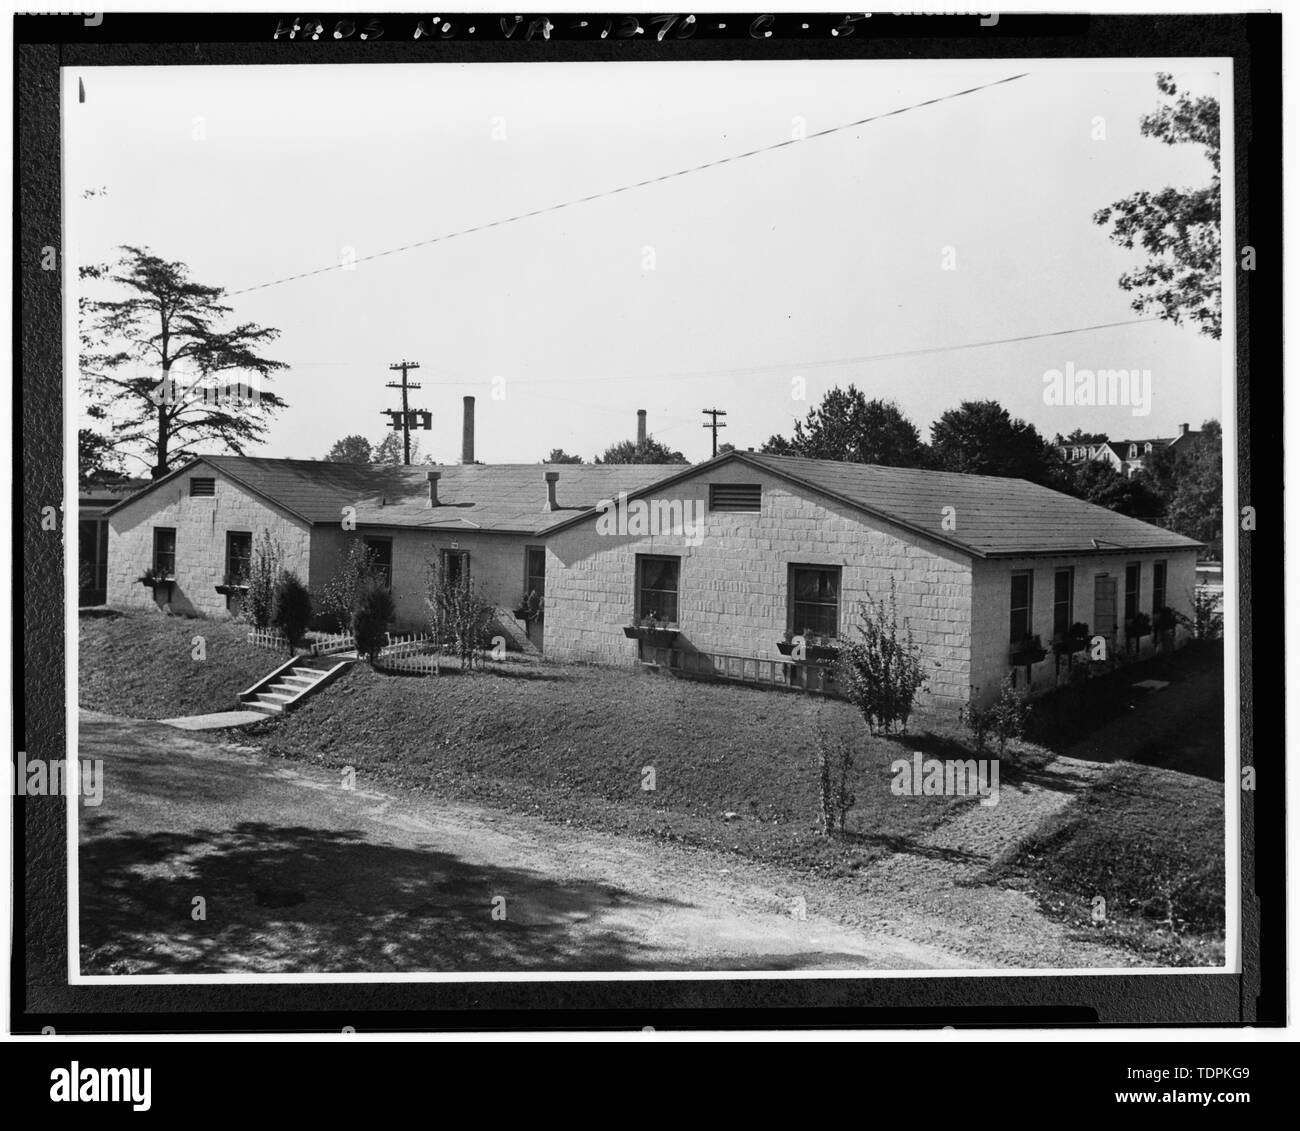 ca. 1944 (original print on file at U.S. Army Intelligence Security Command, Fort Belvoir, Virginia). VIEW TO SOUTHWEST. - Arlington Hall Station, Building No. 101, 4000 Arlington Boulevard, Arlington, Arlington County, VA; Van Dyke, Tina, transmitter Stock Photo